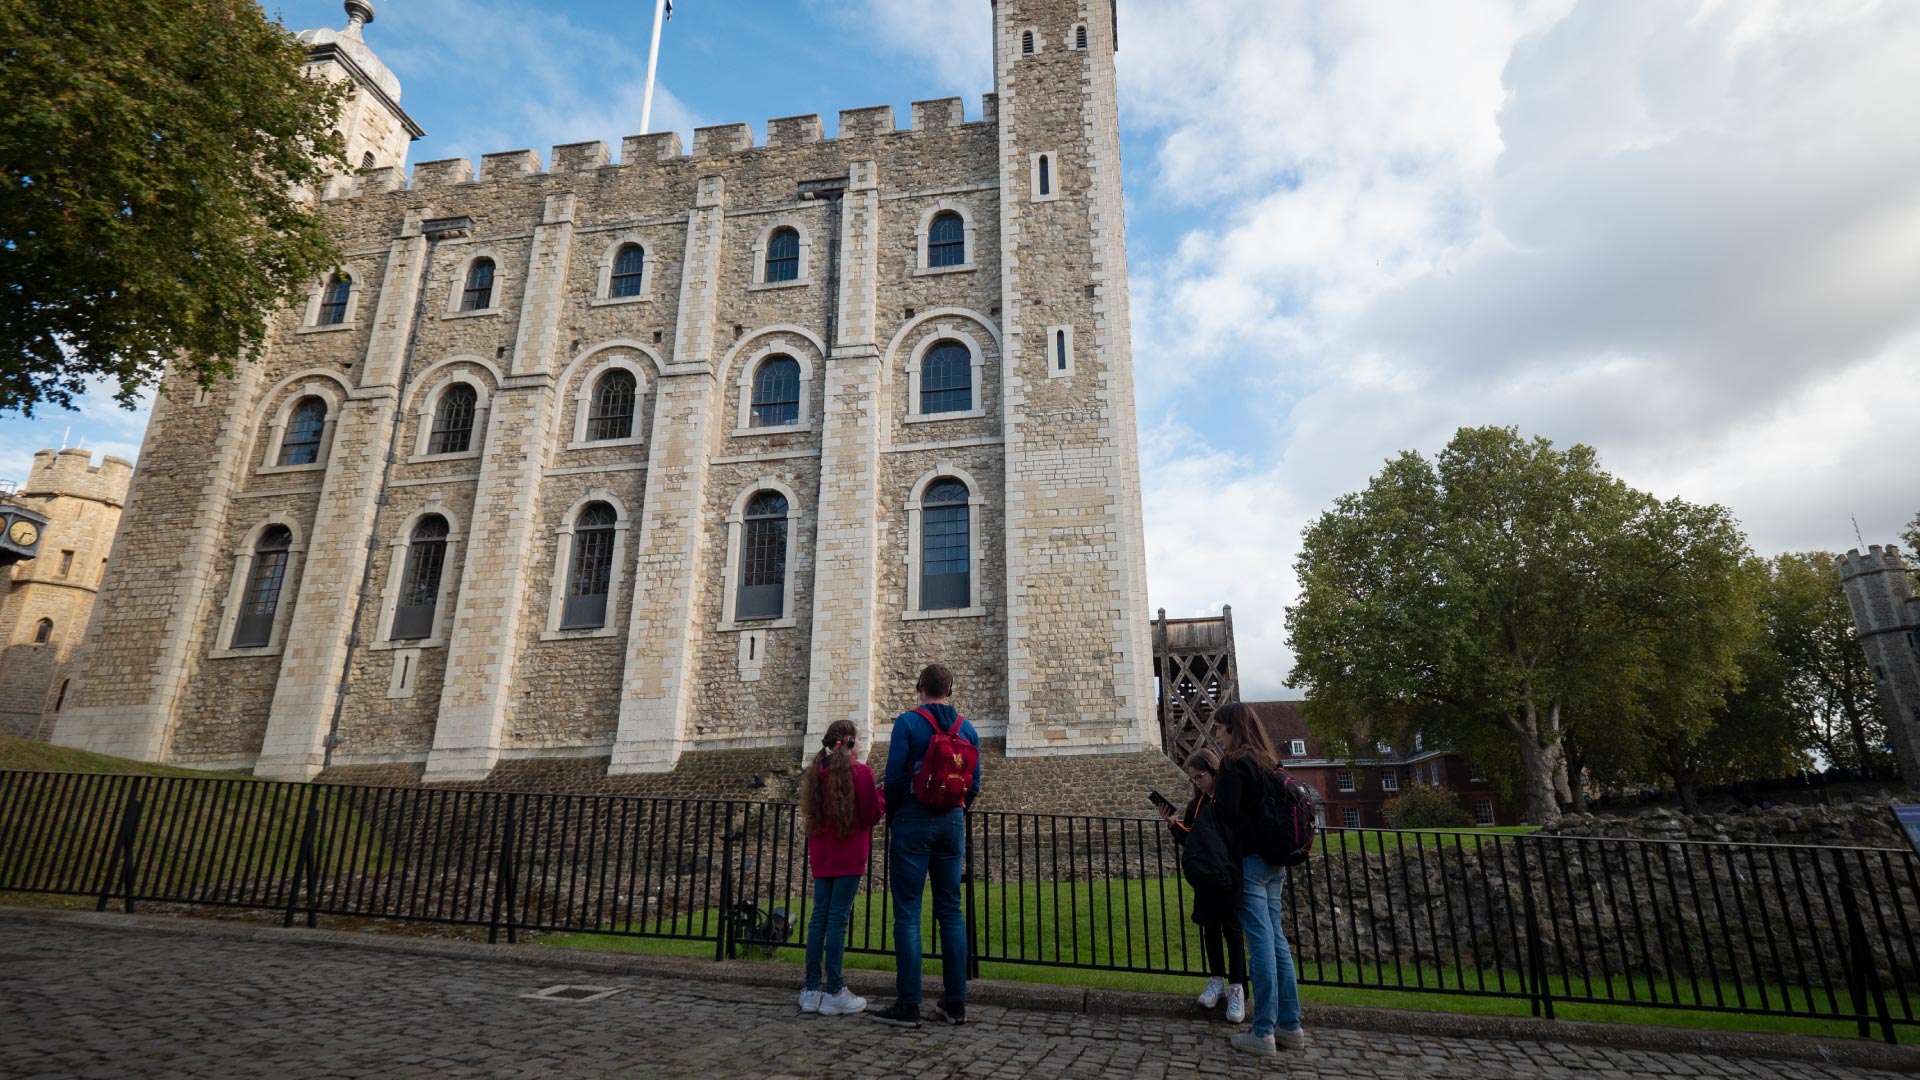 Family Fun Activities to Enjoy on the Weekend in the City of London - A picture of the Tower of London on a summer day, behind the fence there is a family of four standing and listening to an audio guide, an older male, and thee younger girls.